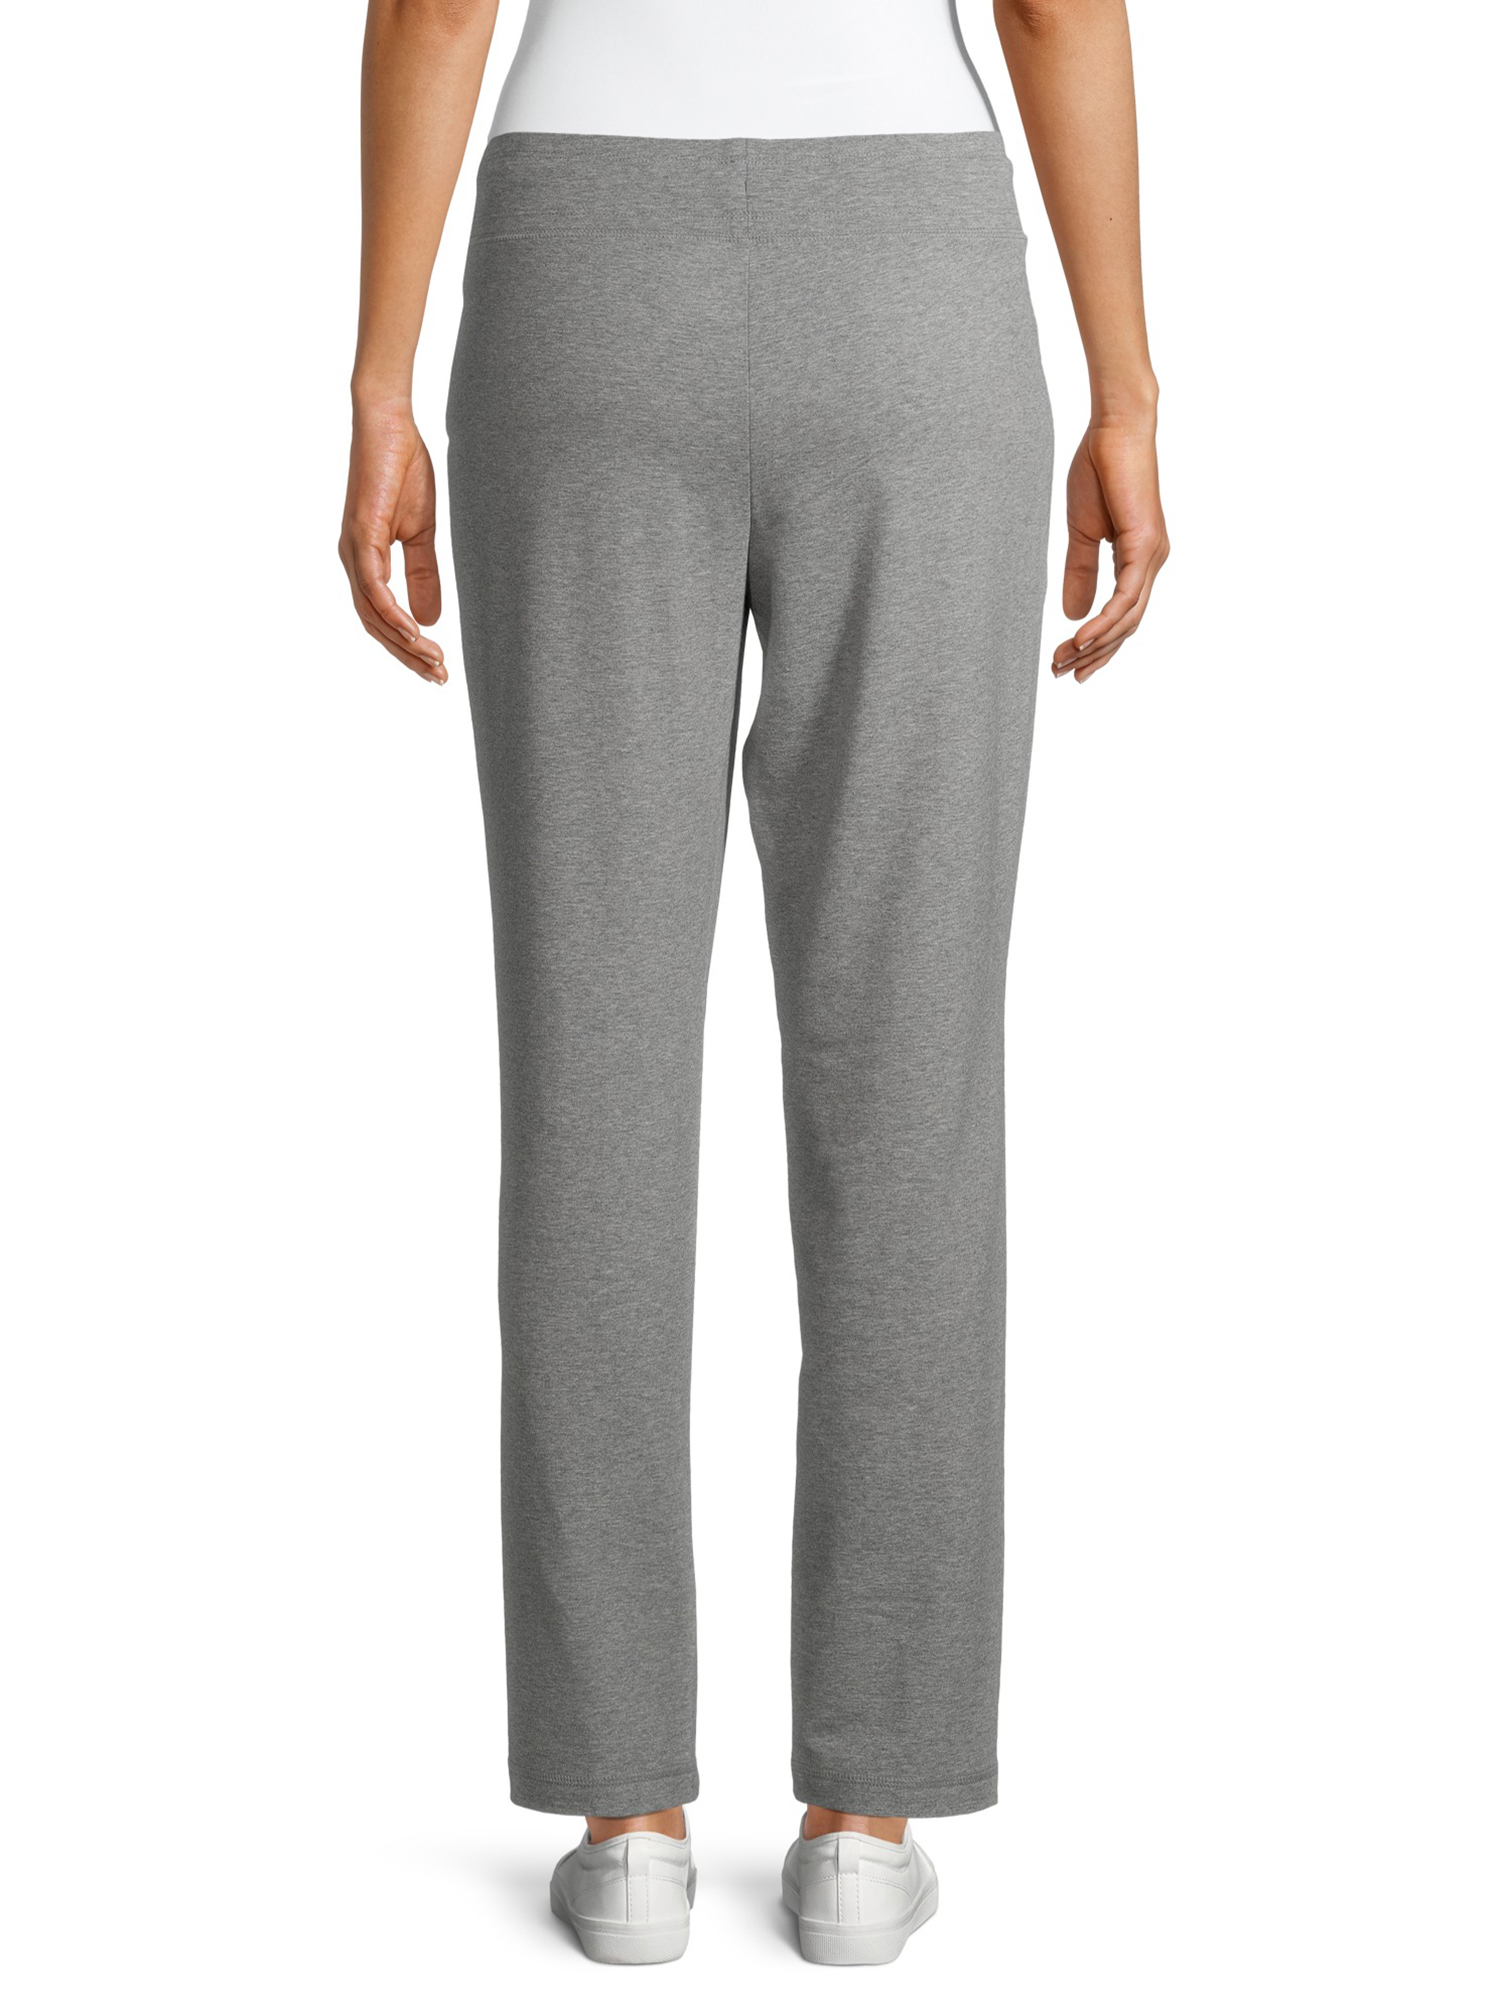 Athletic Works Women's Athleisure Core Knit Pants Available in Regular and Petite - image 3 of 6